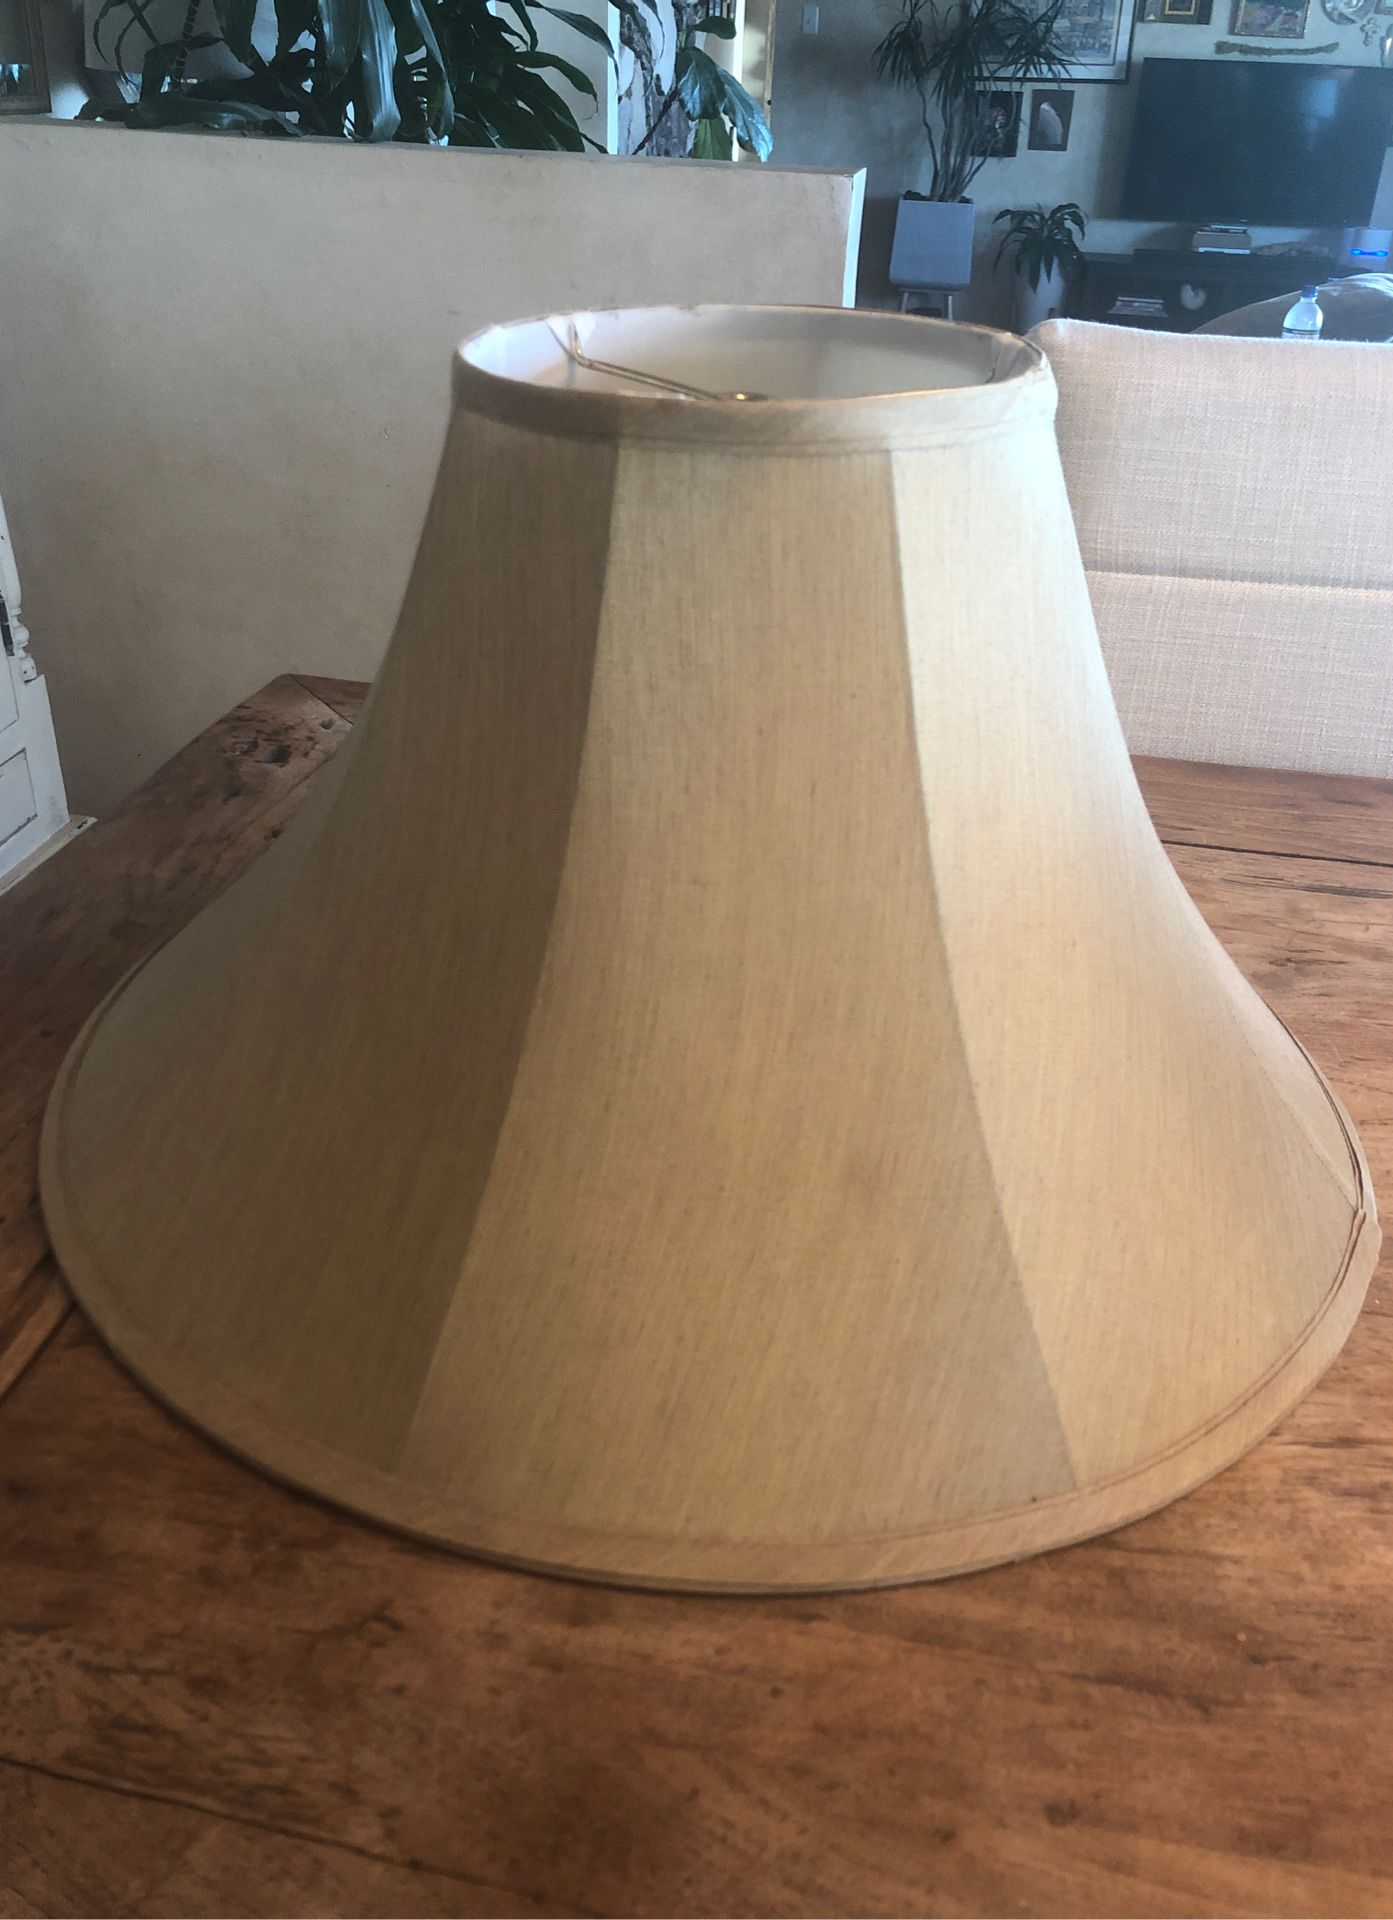 Bronze/Taupe colored Lamp shade